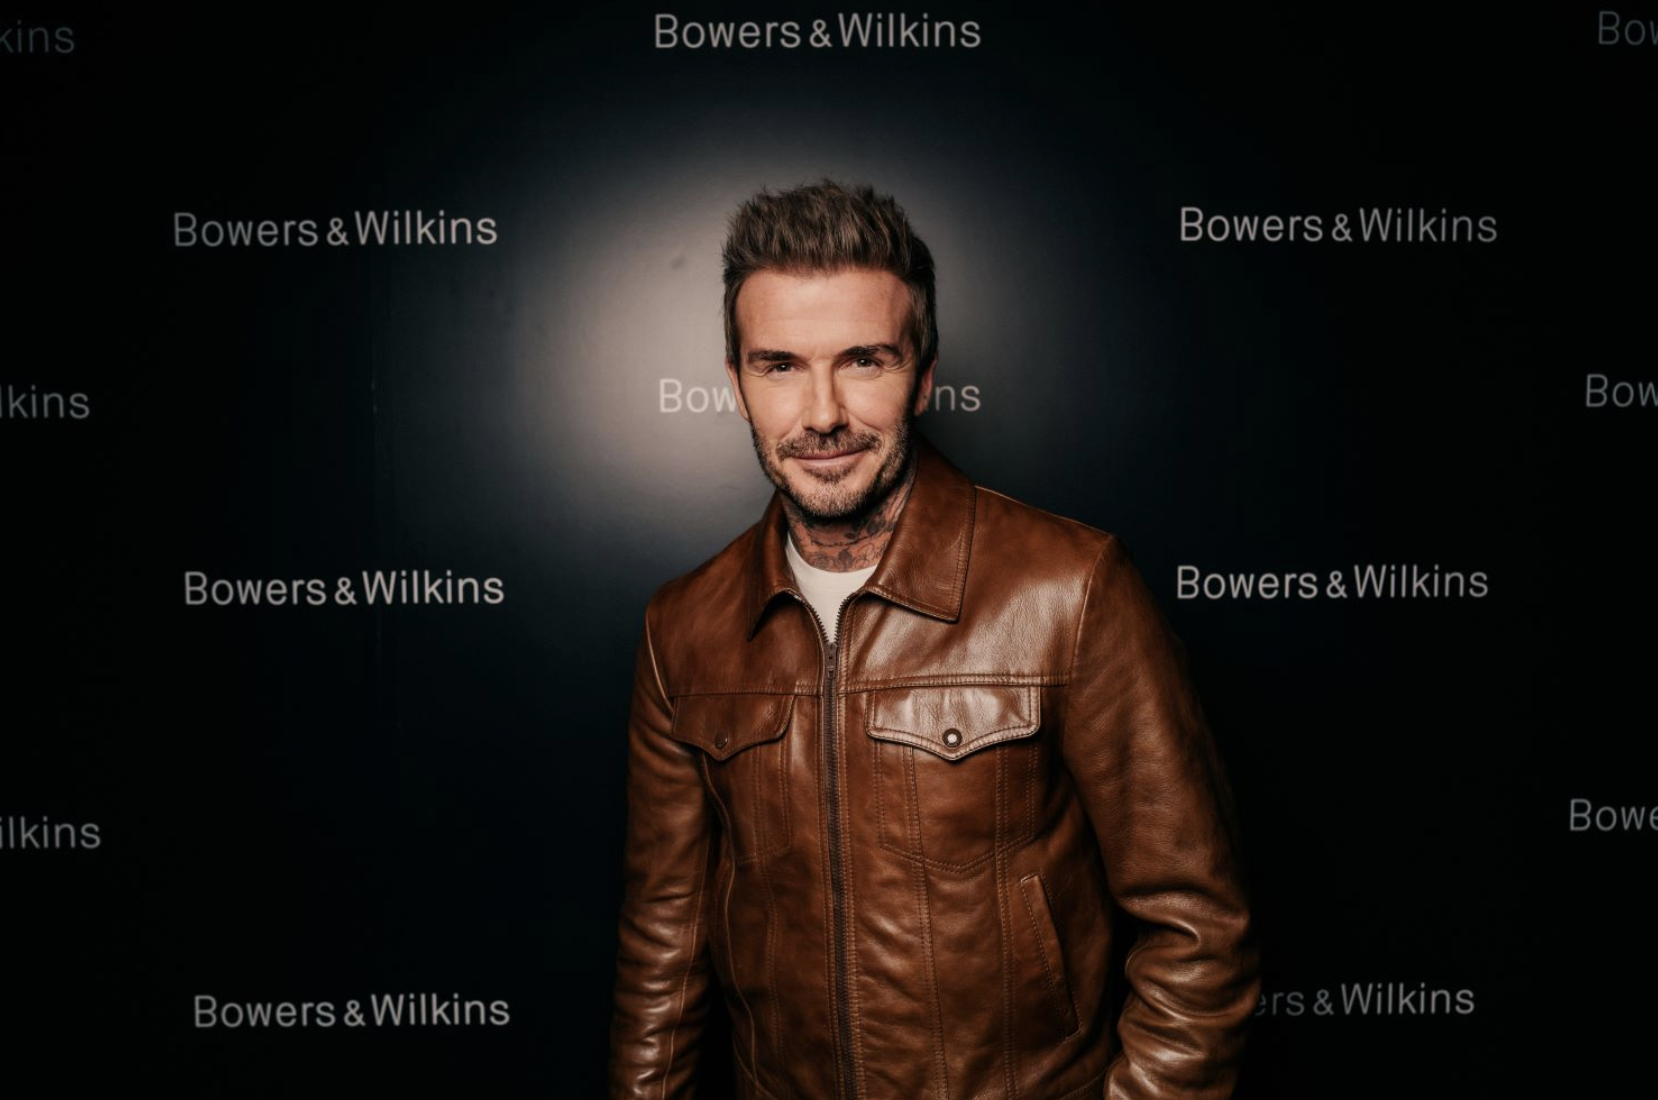 What Went Down at An Evening With David Beckham in West London